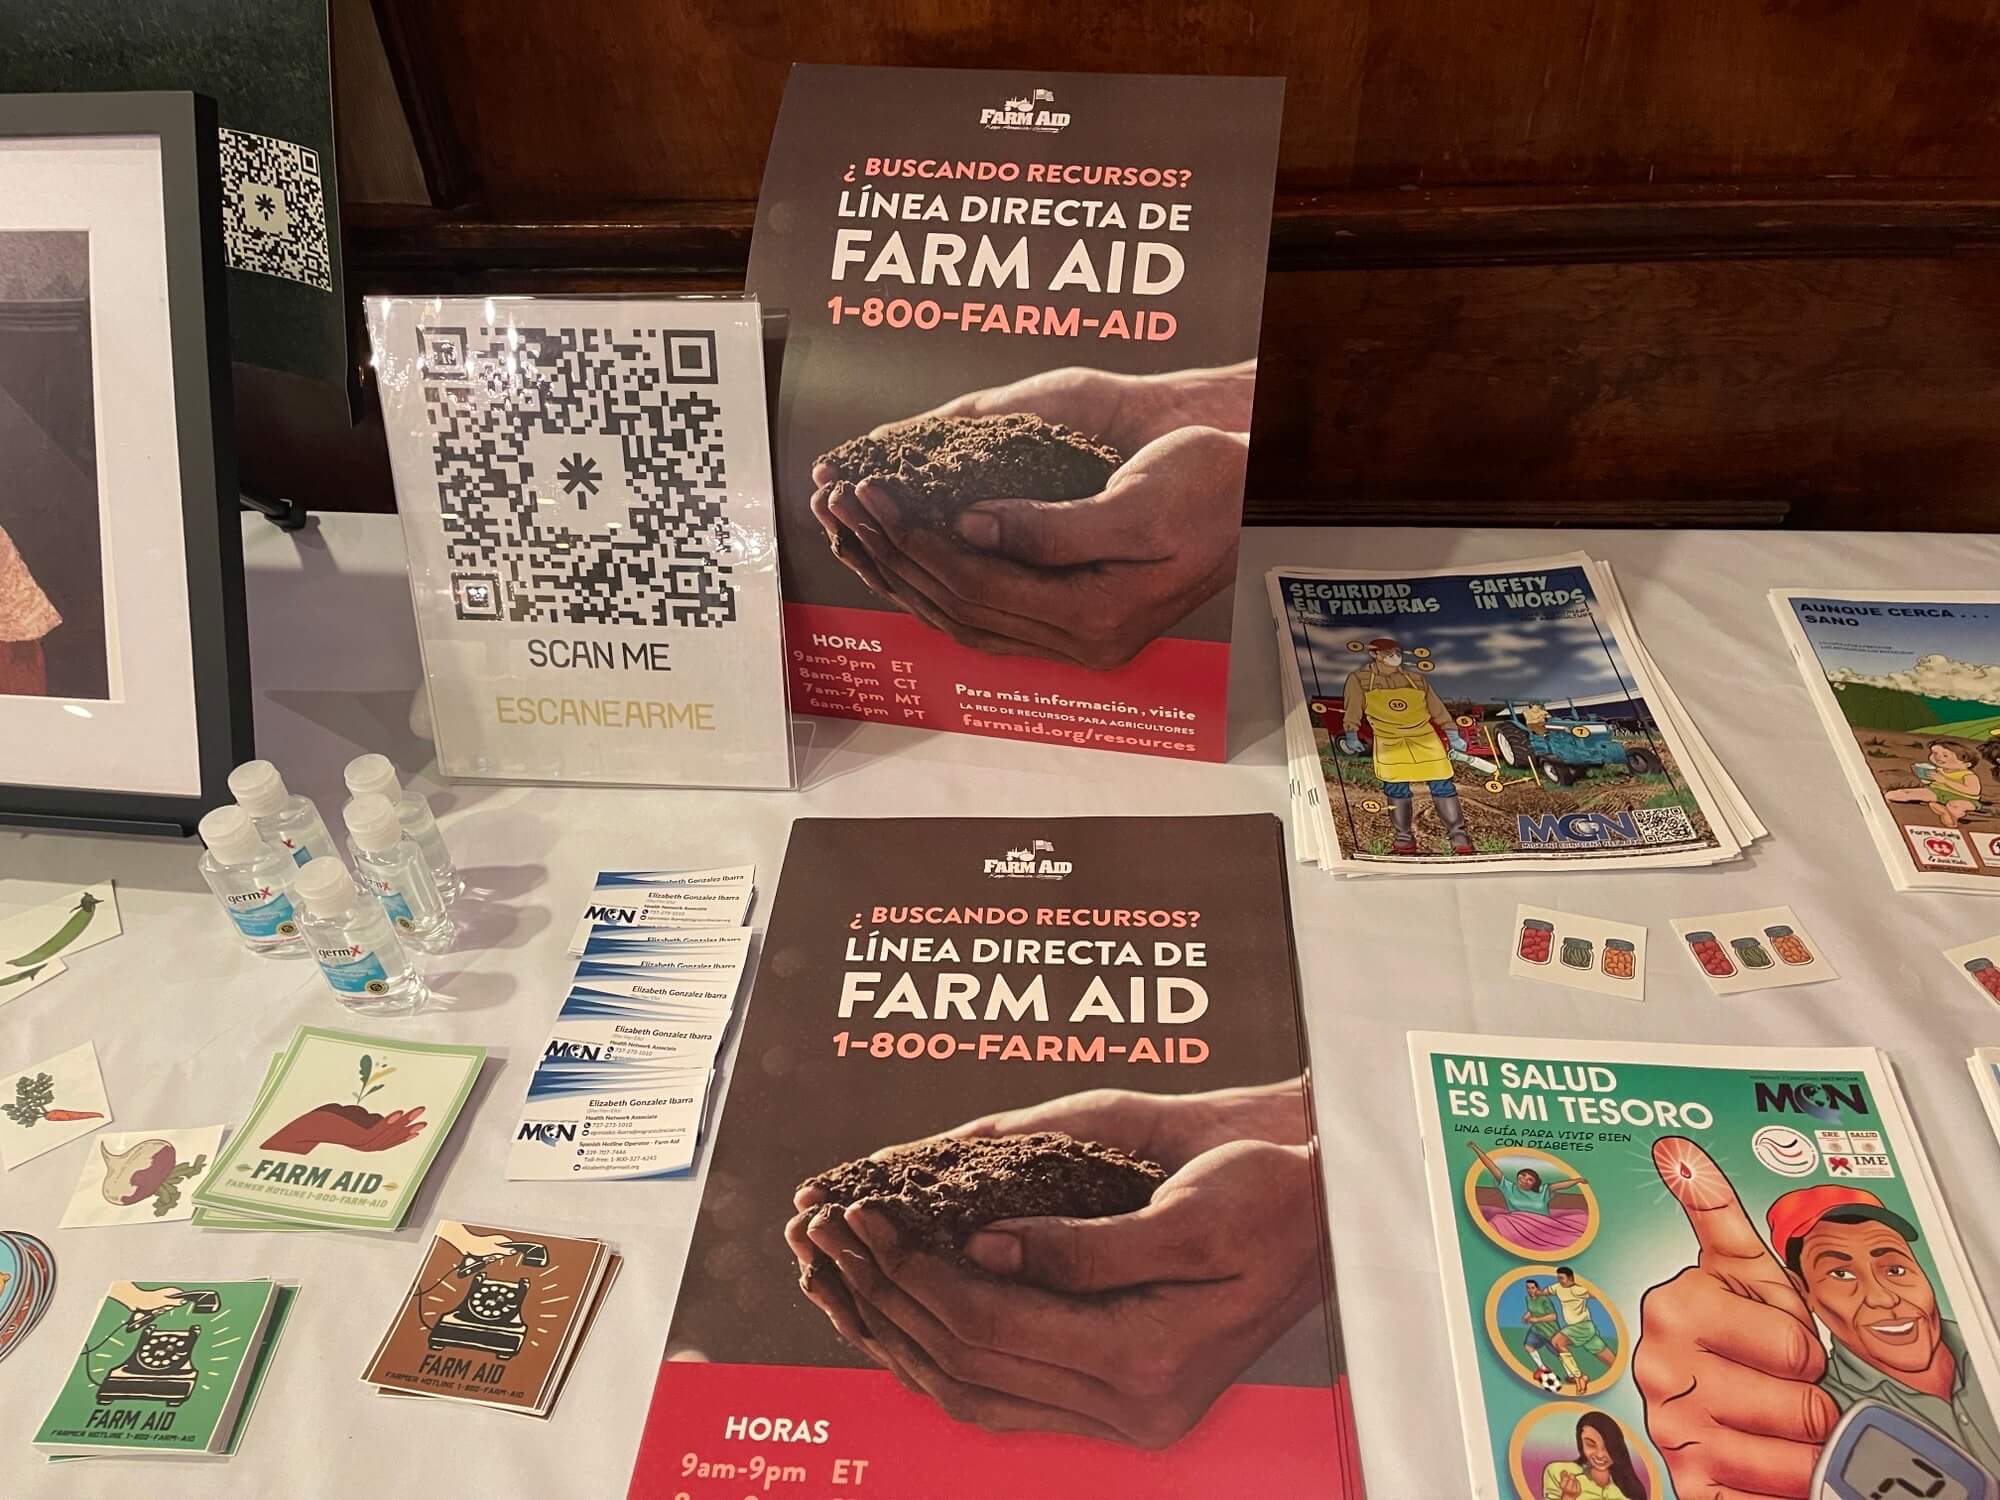 Farm Aid and MCN resources